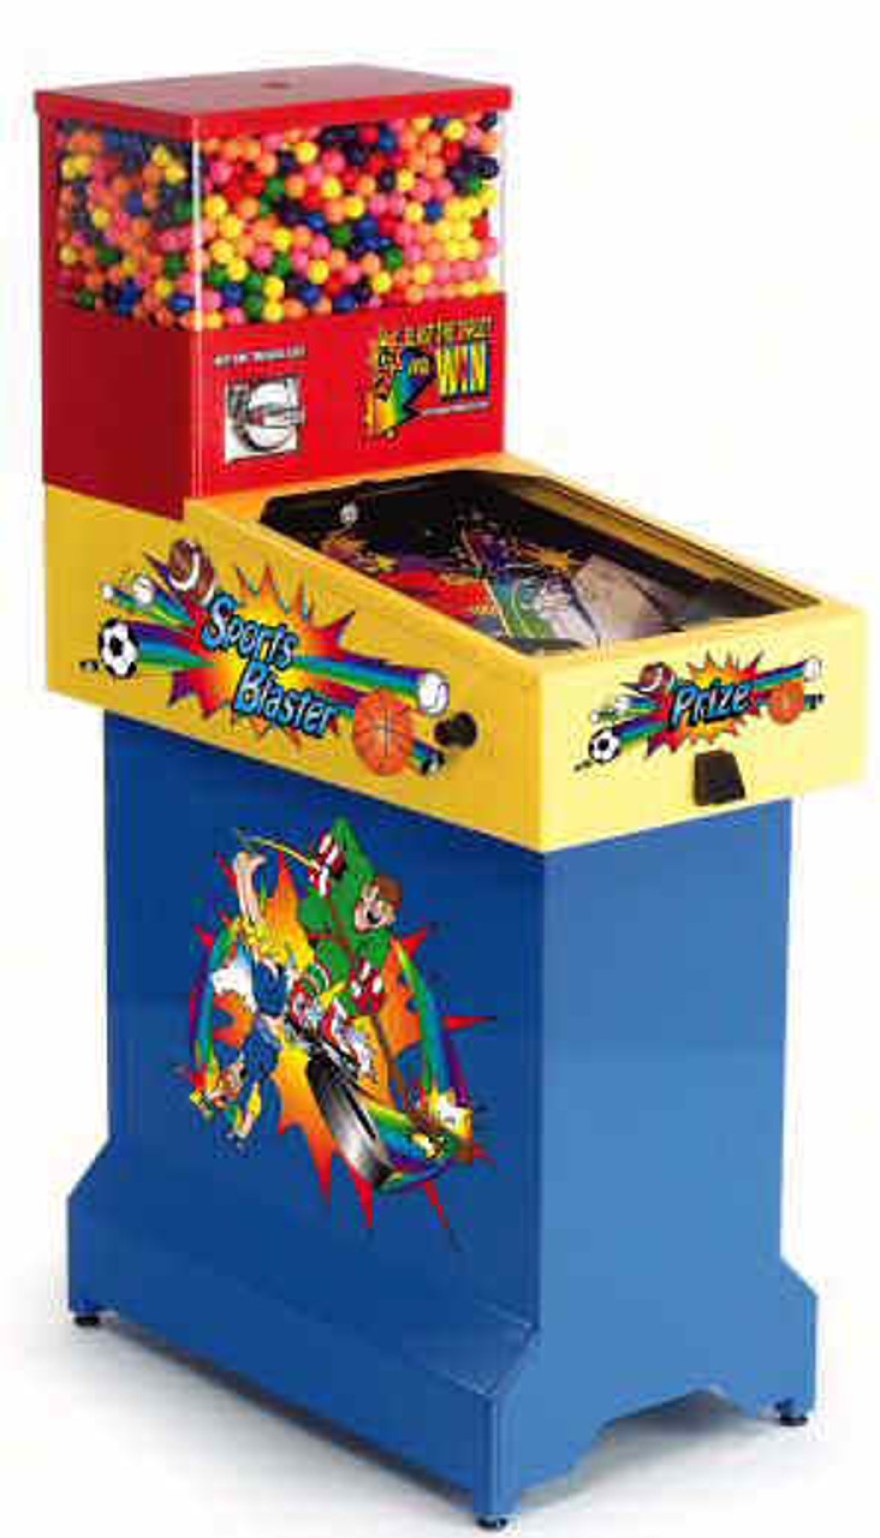 Picture of: Sports Blaster Gumball Machine